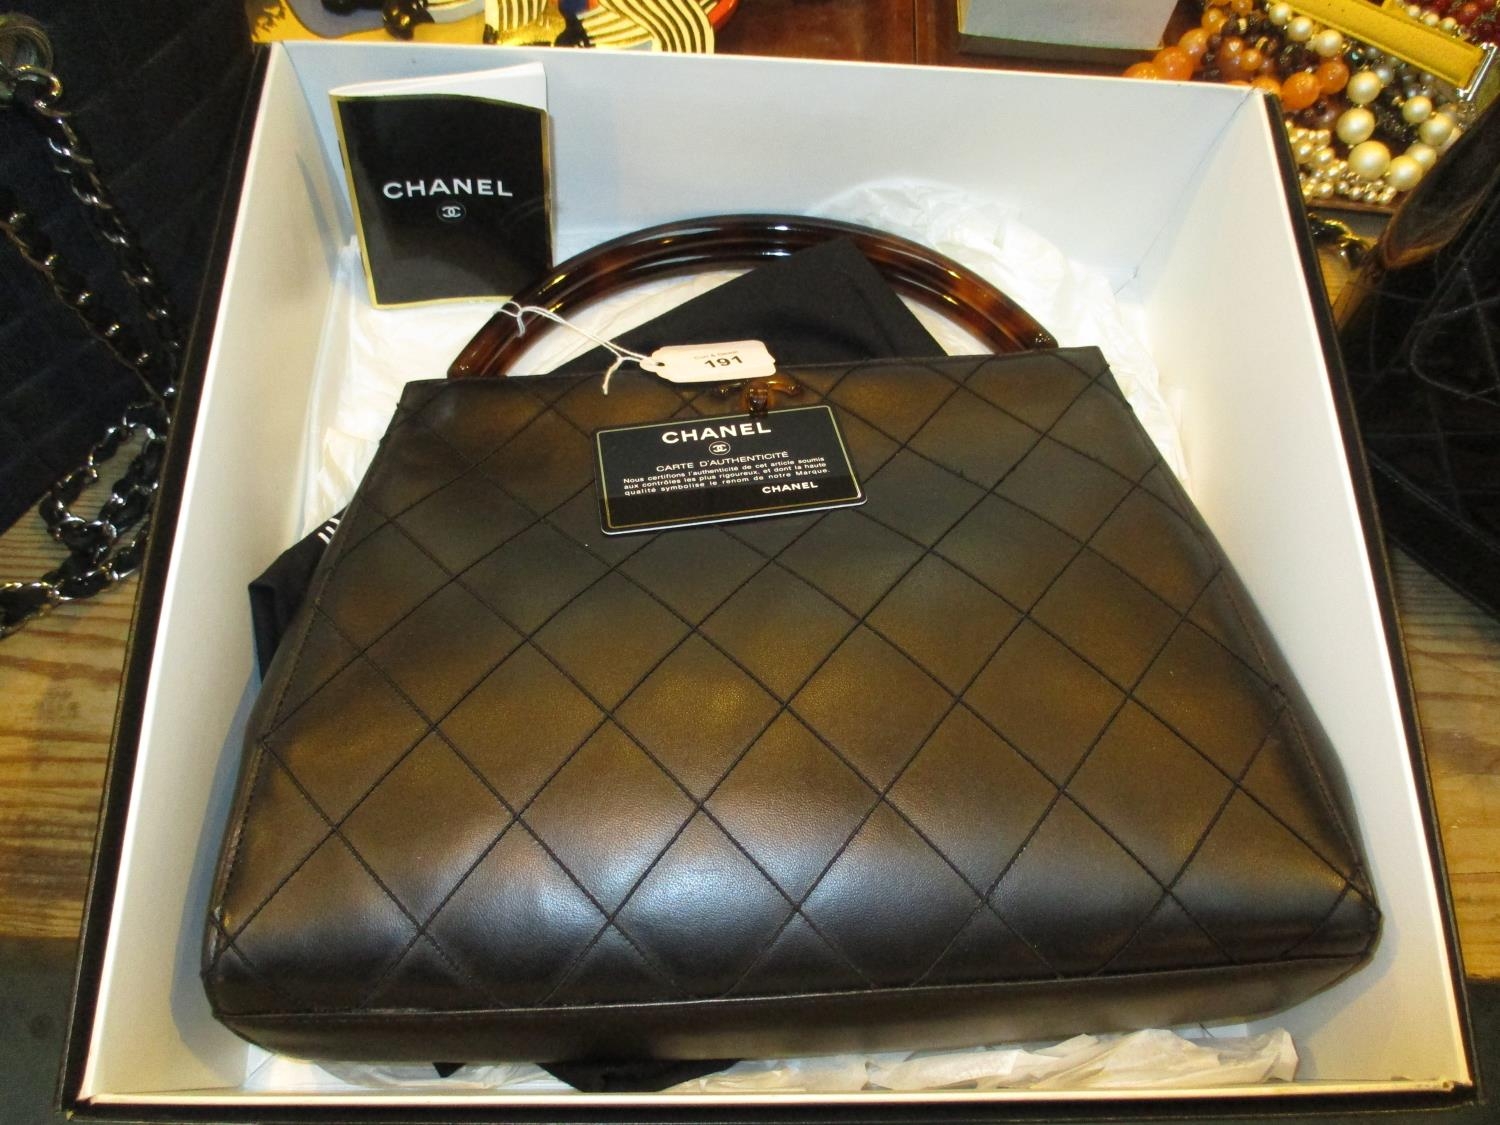 Handbag Bearing Chanel Logo, with Box, Dust Bag, Booklet and Certificate Card No. 5986425, which